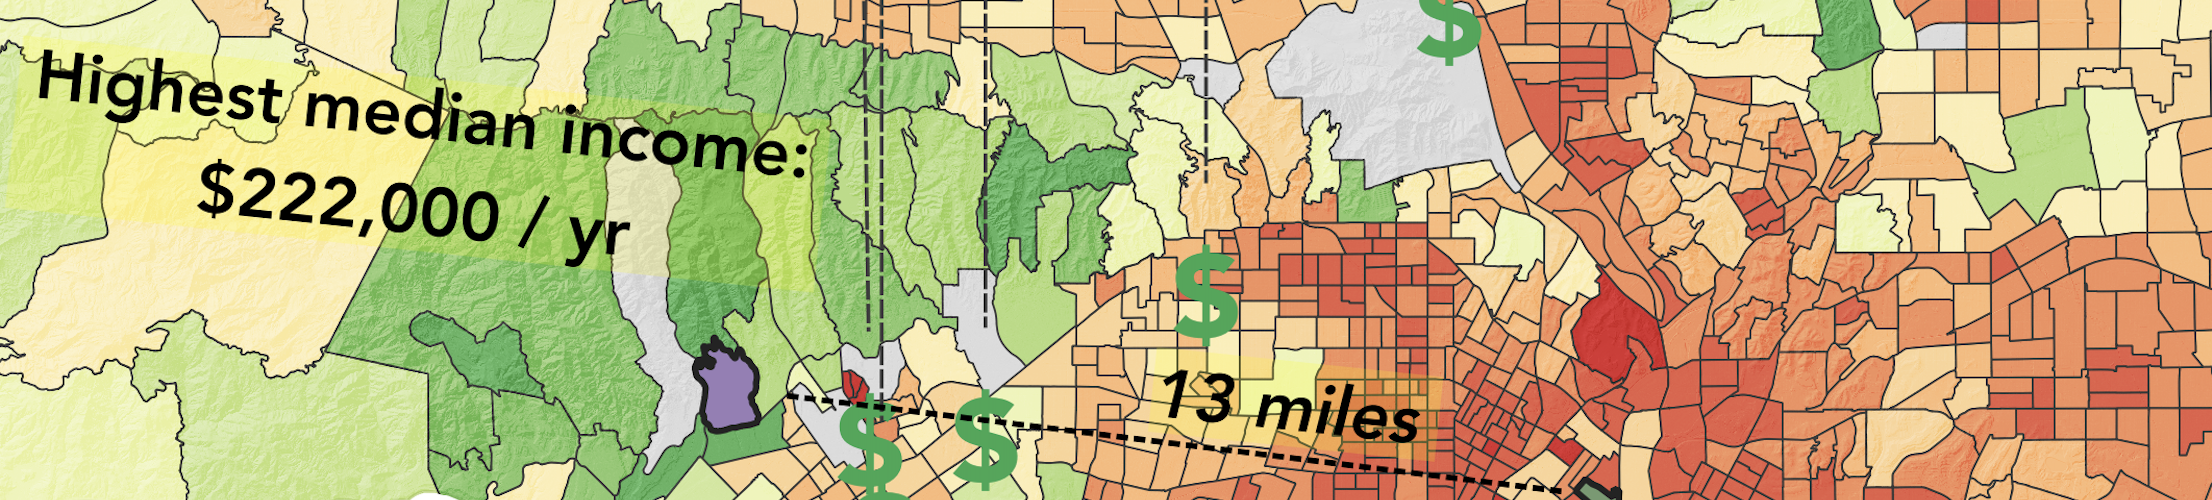 median household income in los angeles county, california